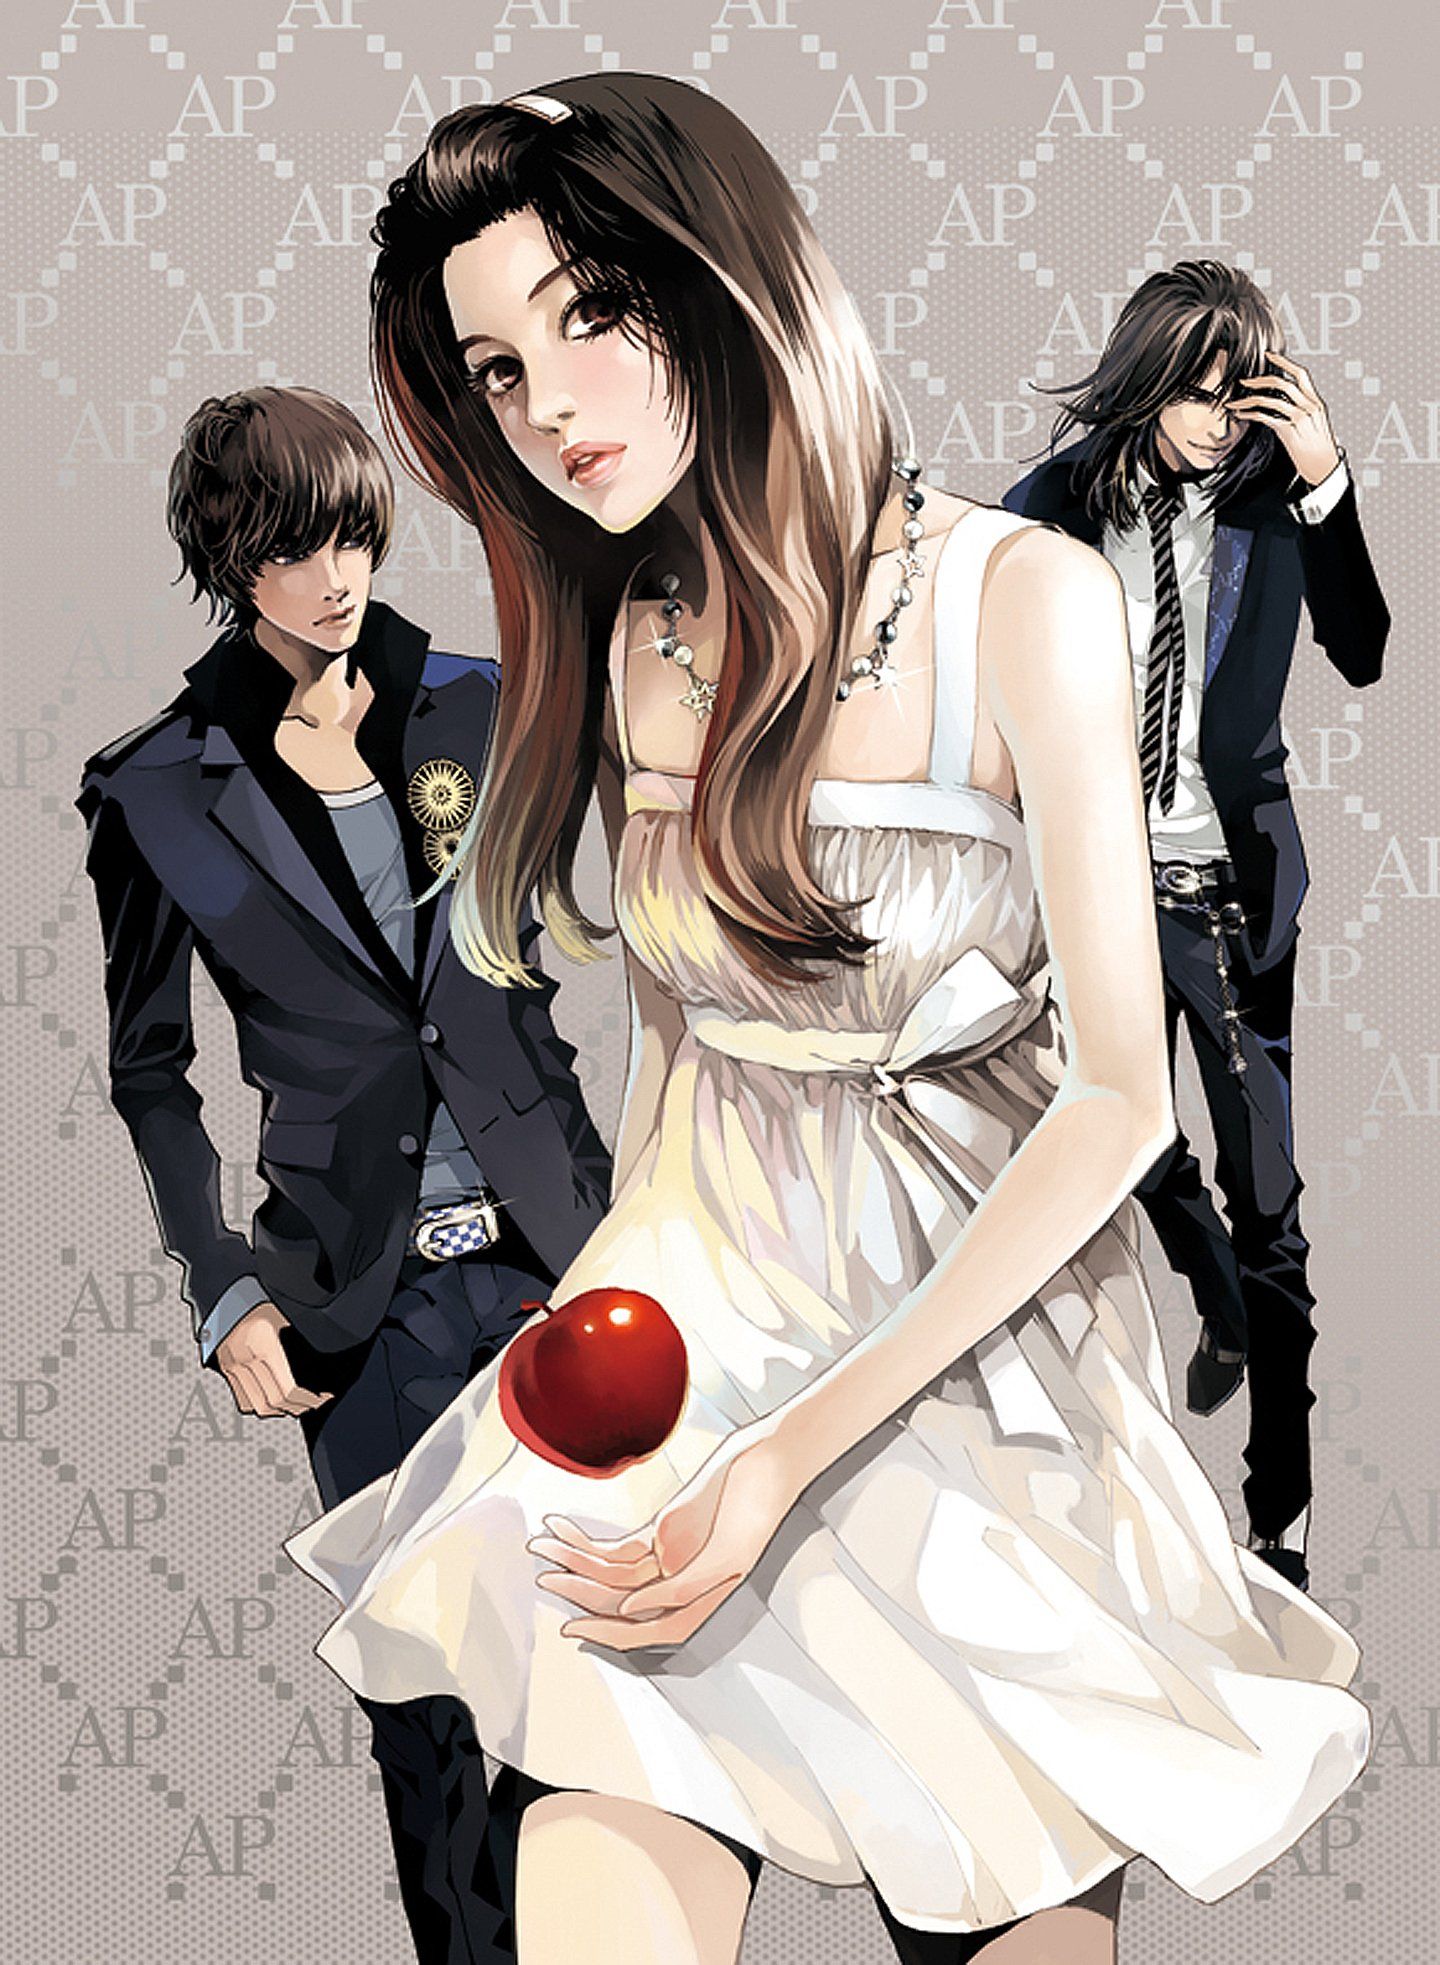 apple, Red, Beautiful, Girl, Boys, Black, Suit, Dress, Couples